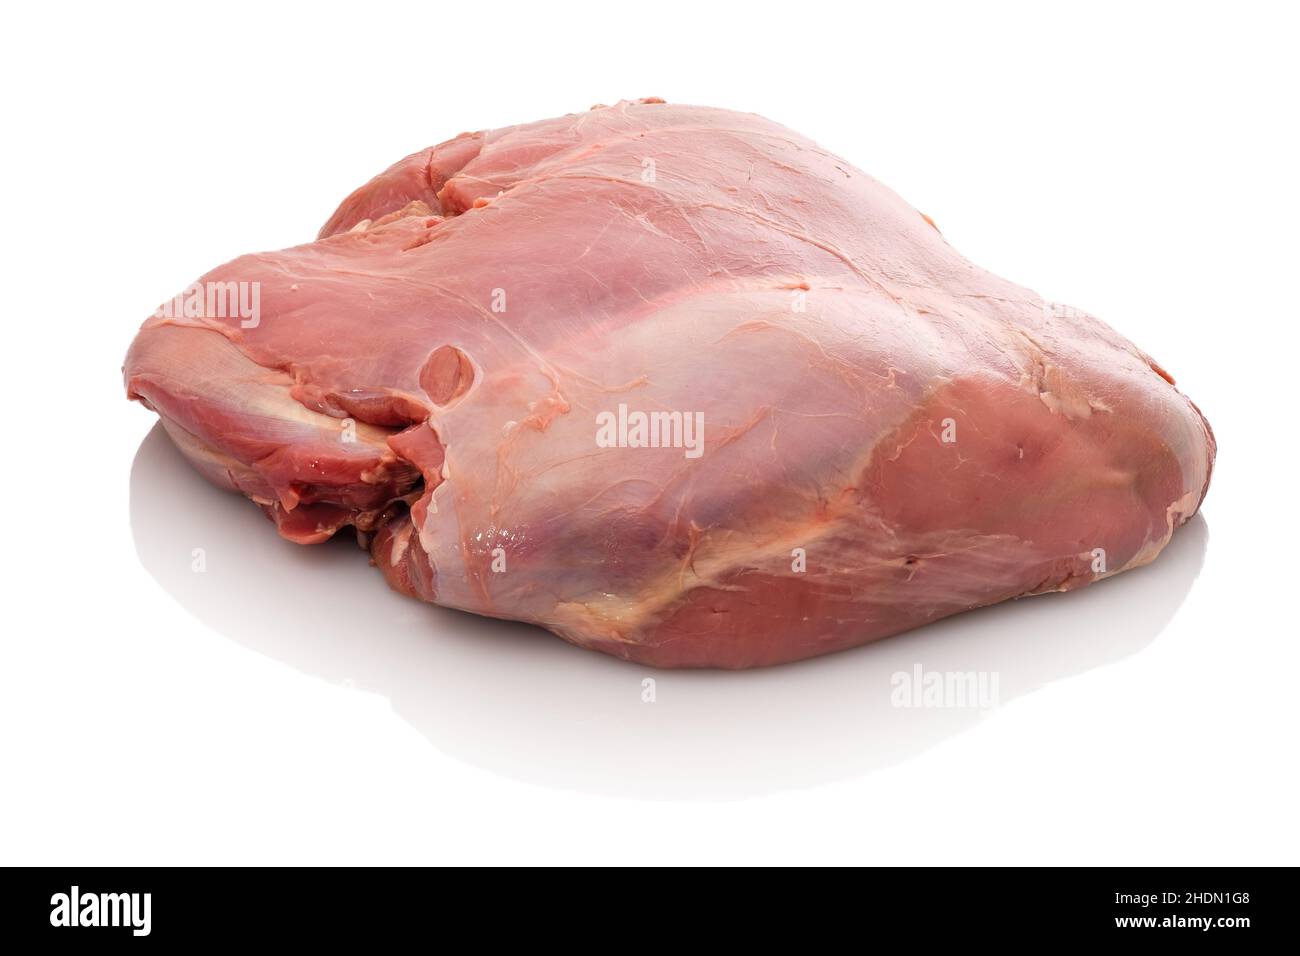 game meat, Roasted Venison, game meats, venison Stock Photo